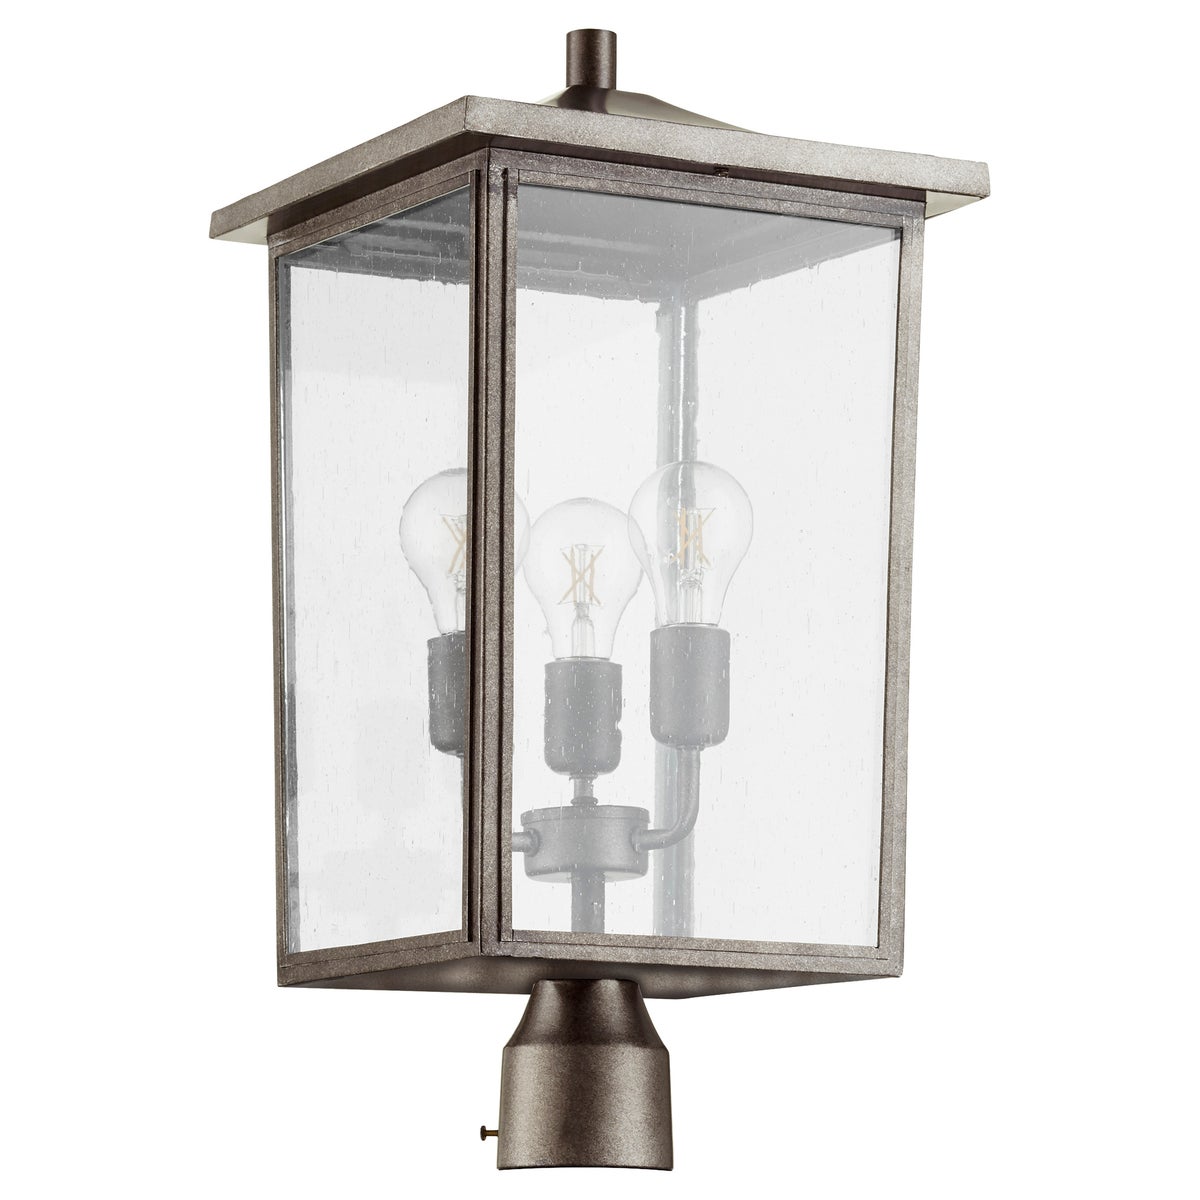 A farmhouse outdoor post light with a clear-seeded glass enclosure, featuring three 60W medium base light sources. Provides a warm ambient glow for your yard.